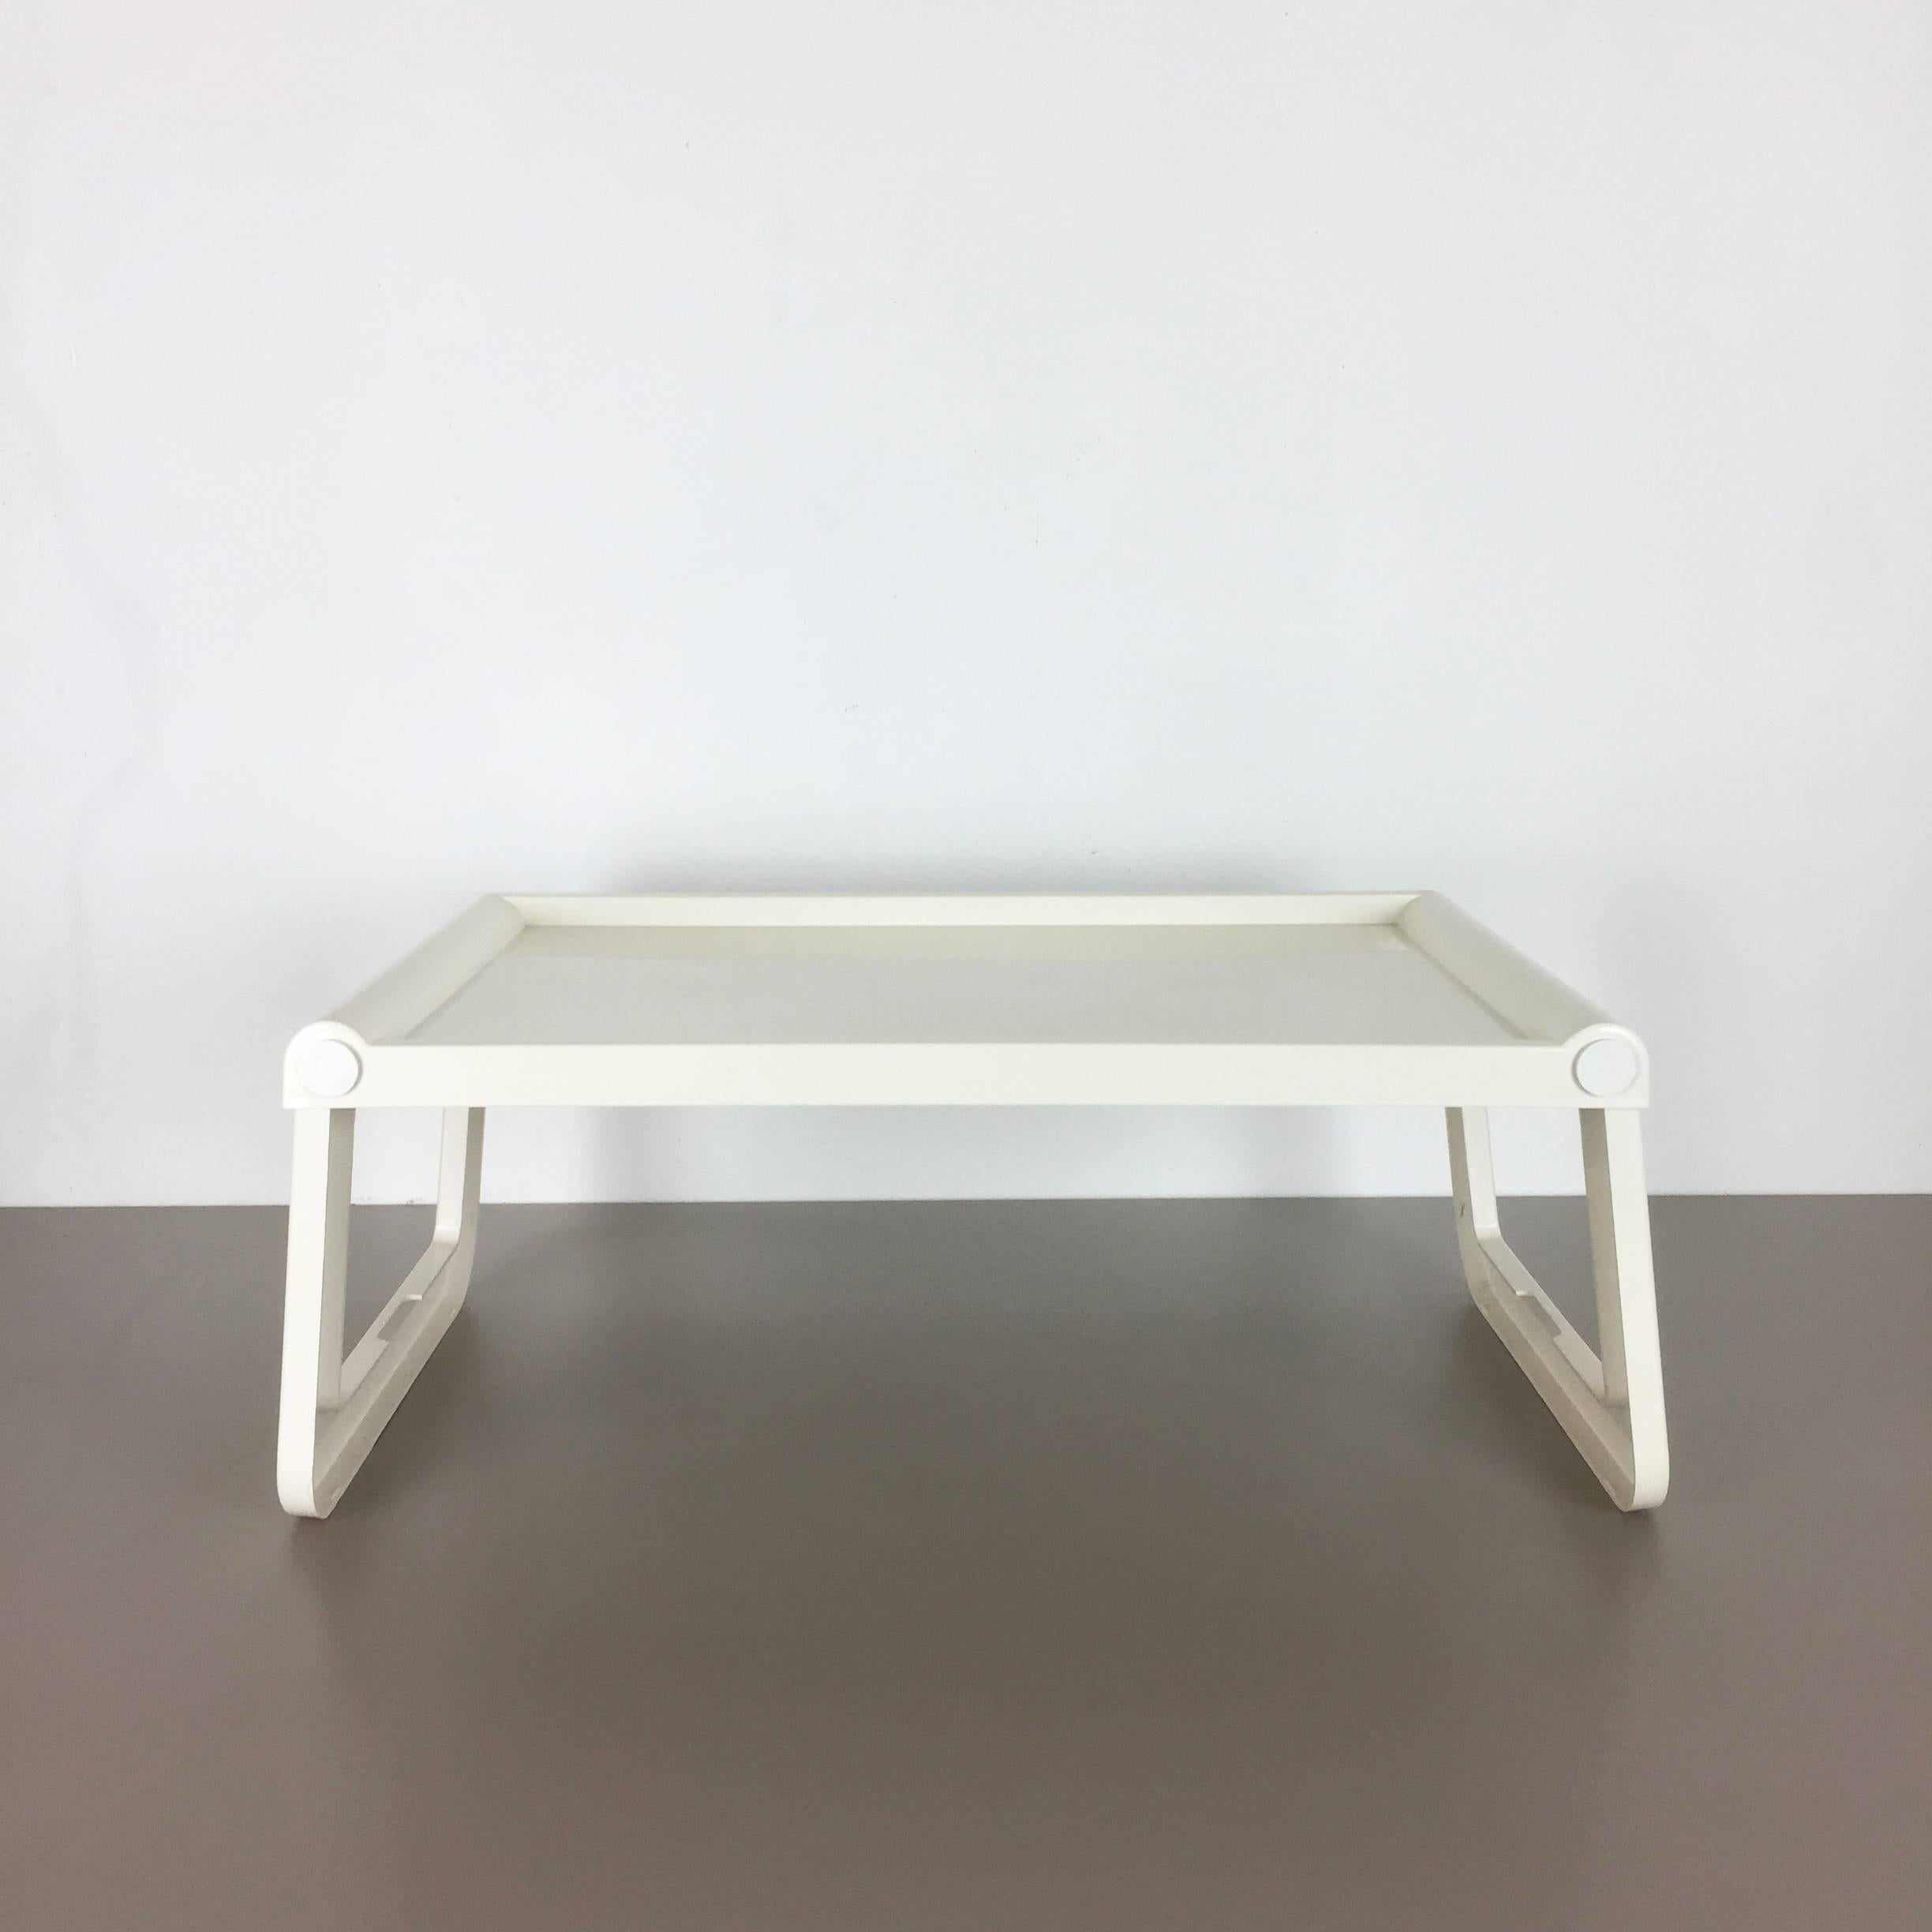 Article:

Plastic tray


Design:

Luigi Massoni


Producer:

Guzzini, Italy


Decade:

1980s


Description:

This tray table was designed by Luigi Massoni and produced by Guzzini in Italy in the 1980s. It is made from